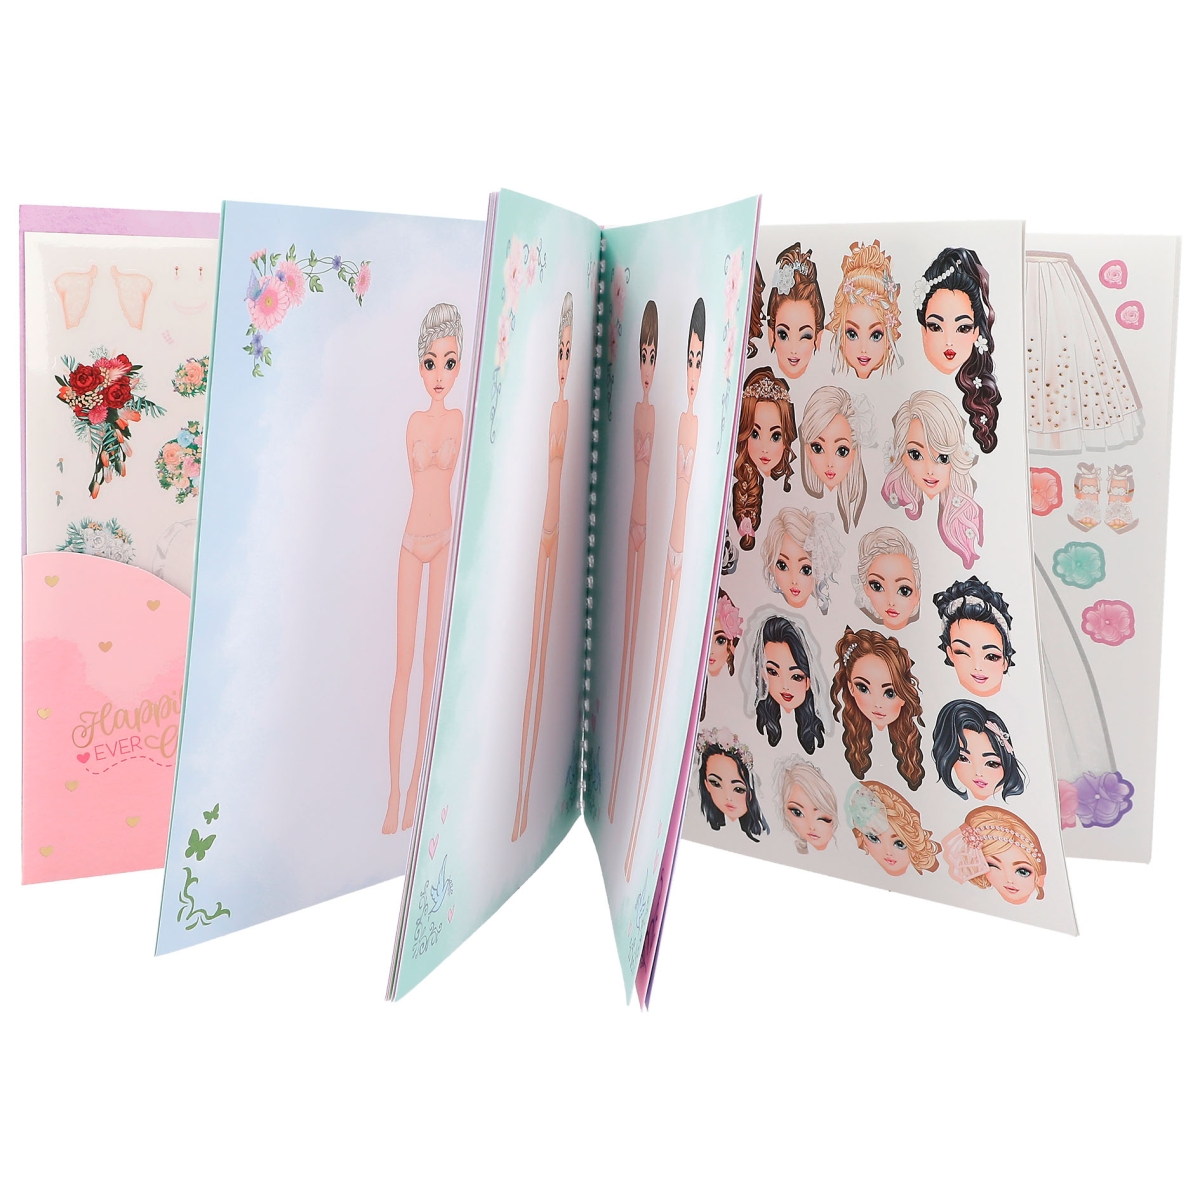 Top Model - Dress Me Up Cut Out Book